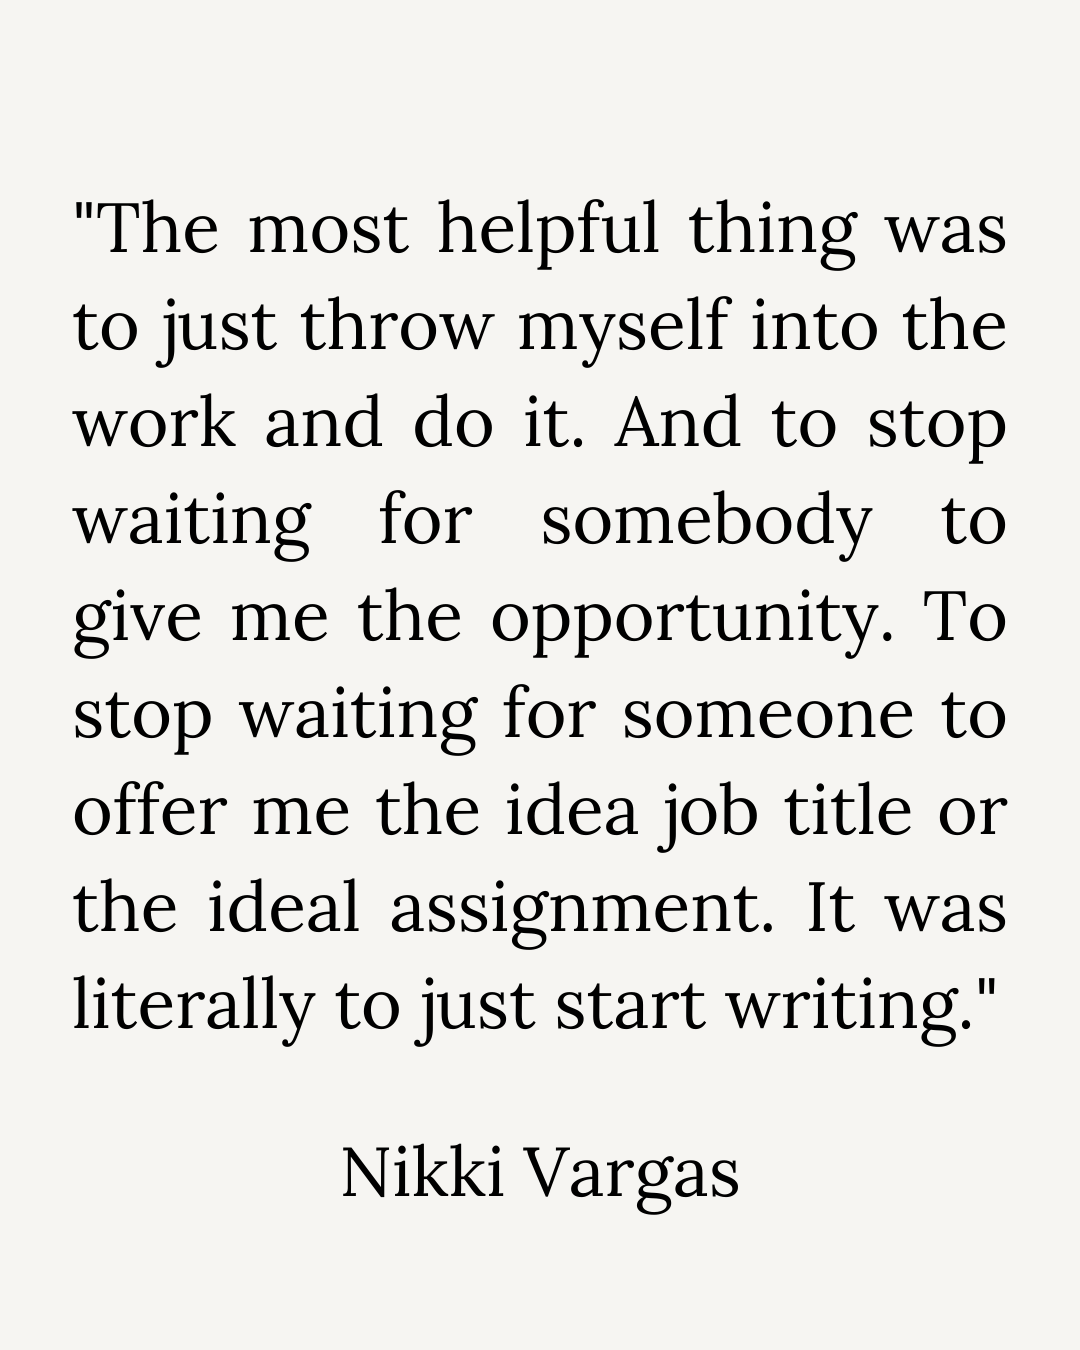 "The most helpful thing was to just throw myself into the work and do it. And to stop waiting or somebody to give me the opportunity. To stop waiting for someone to offer me the idea job title or the ideal assignment. It was literally to just start writing."